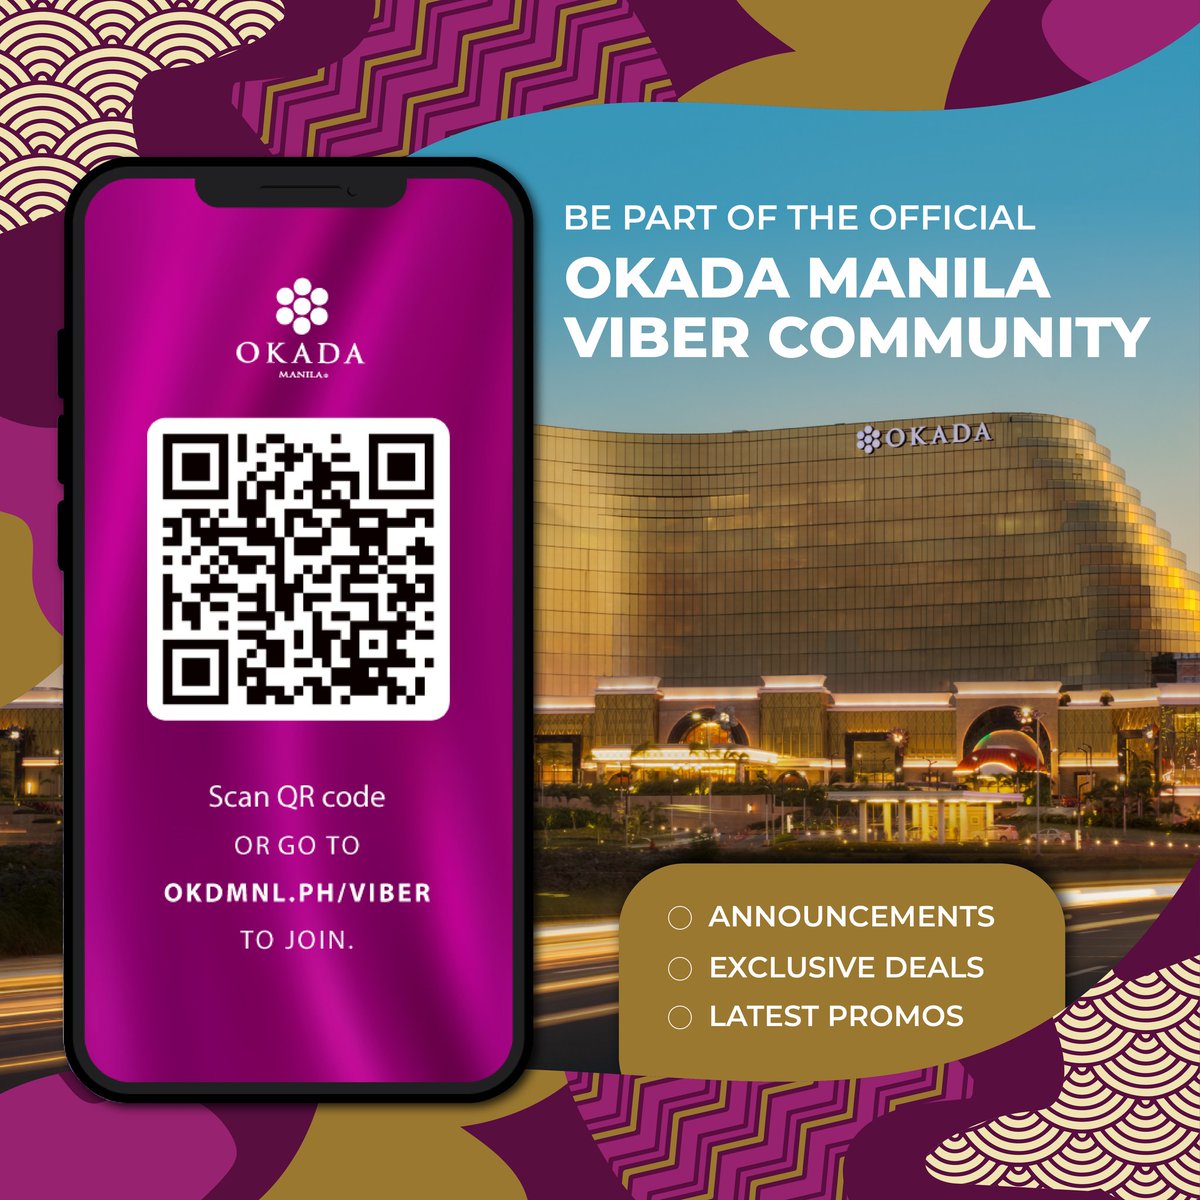 Okada Manila is on Viber! Join our community to get the latest updates and goings-on about the country’s most iconic integrated resort. Scan the QR code below or tap this link to get started: okdmnl.ph/Viber